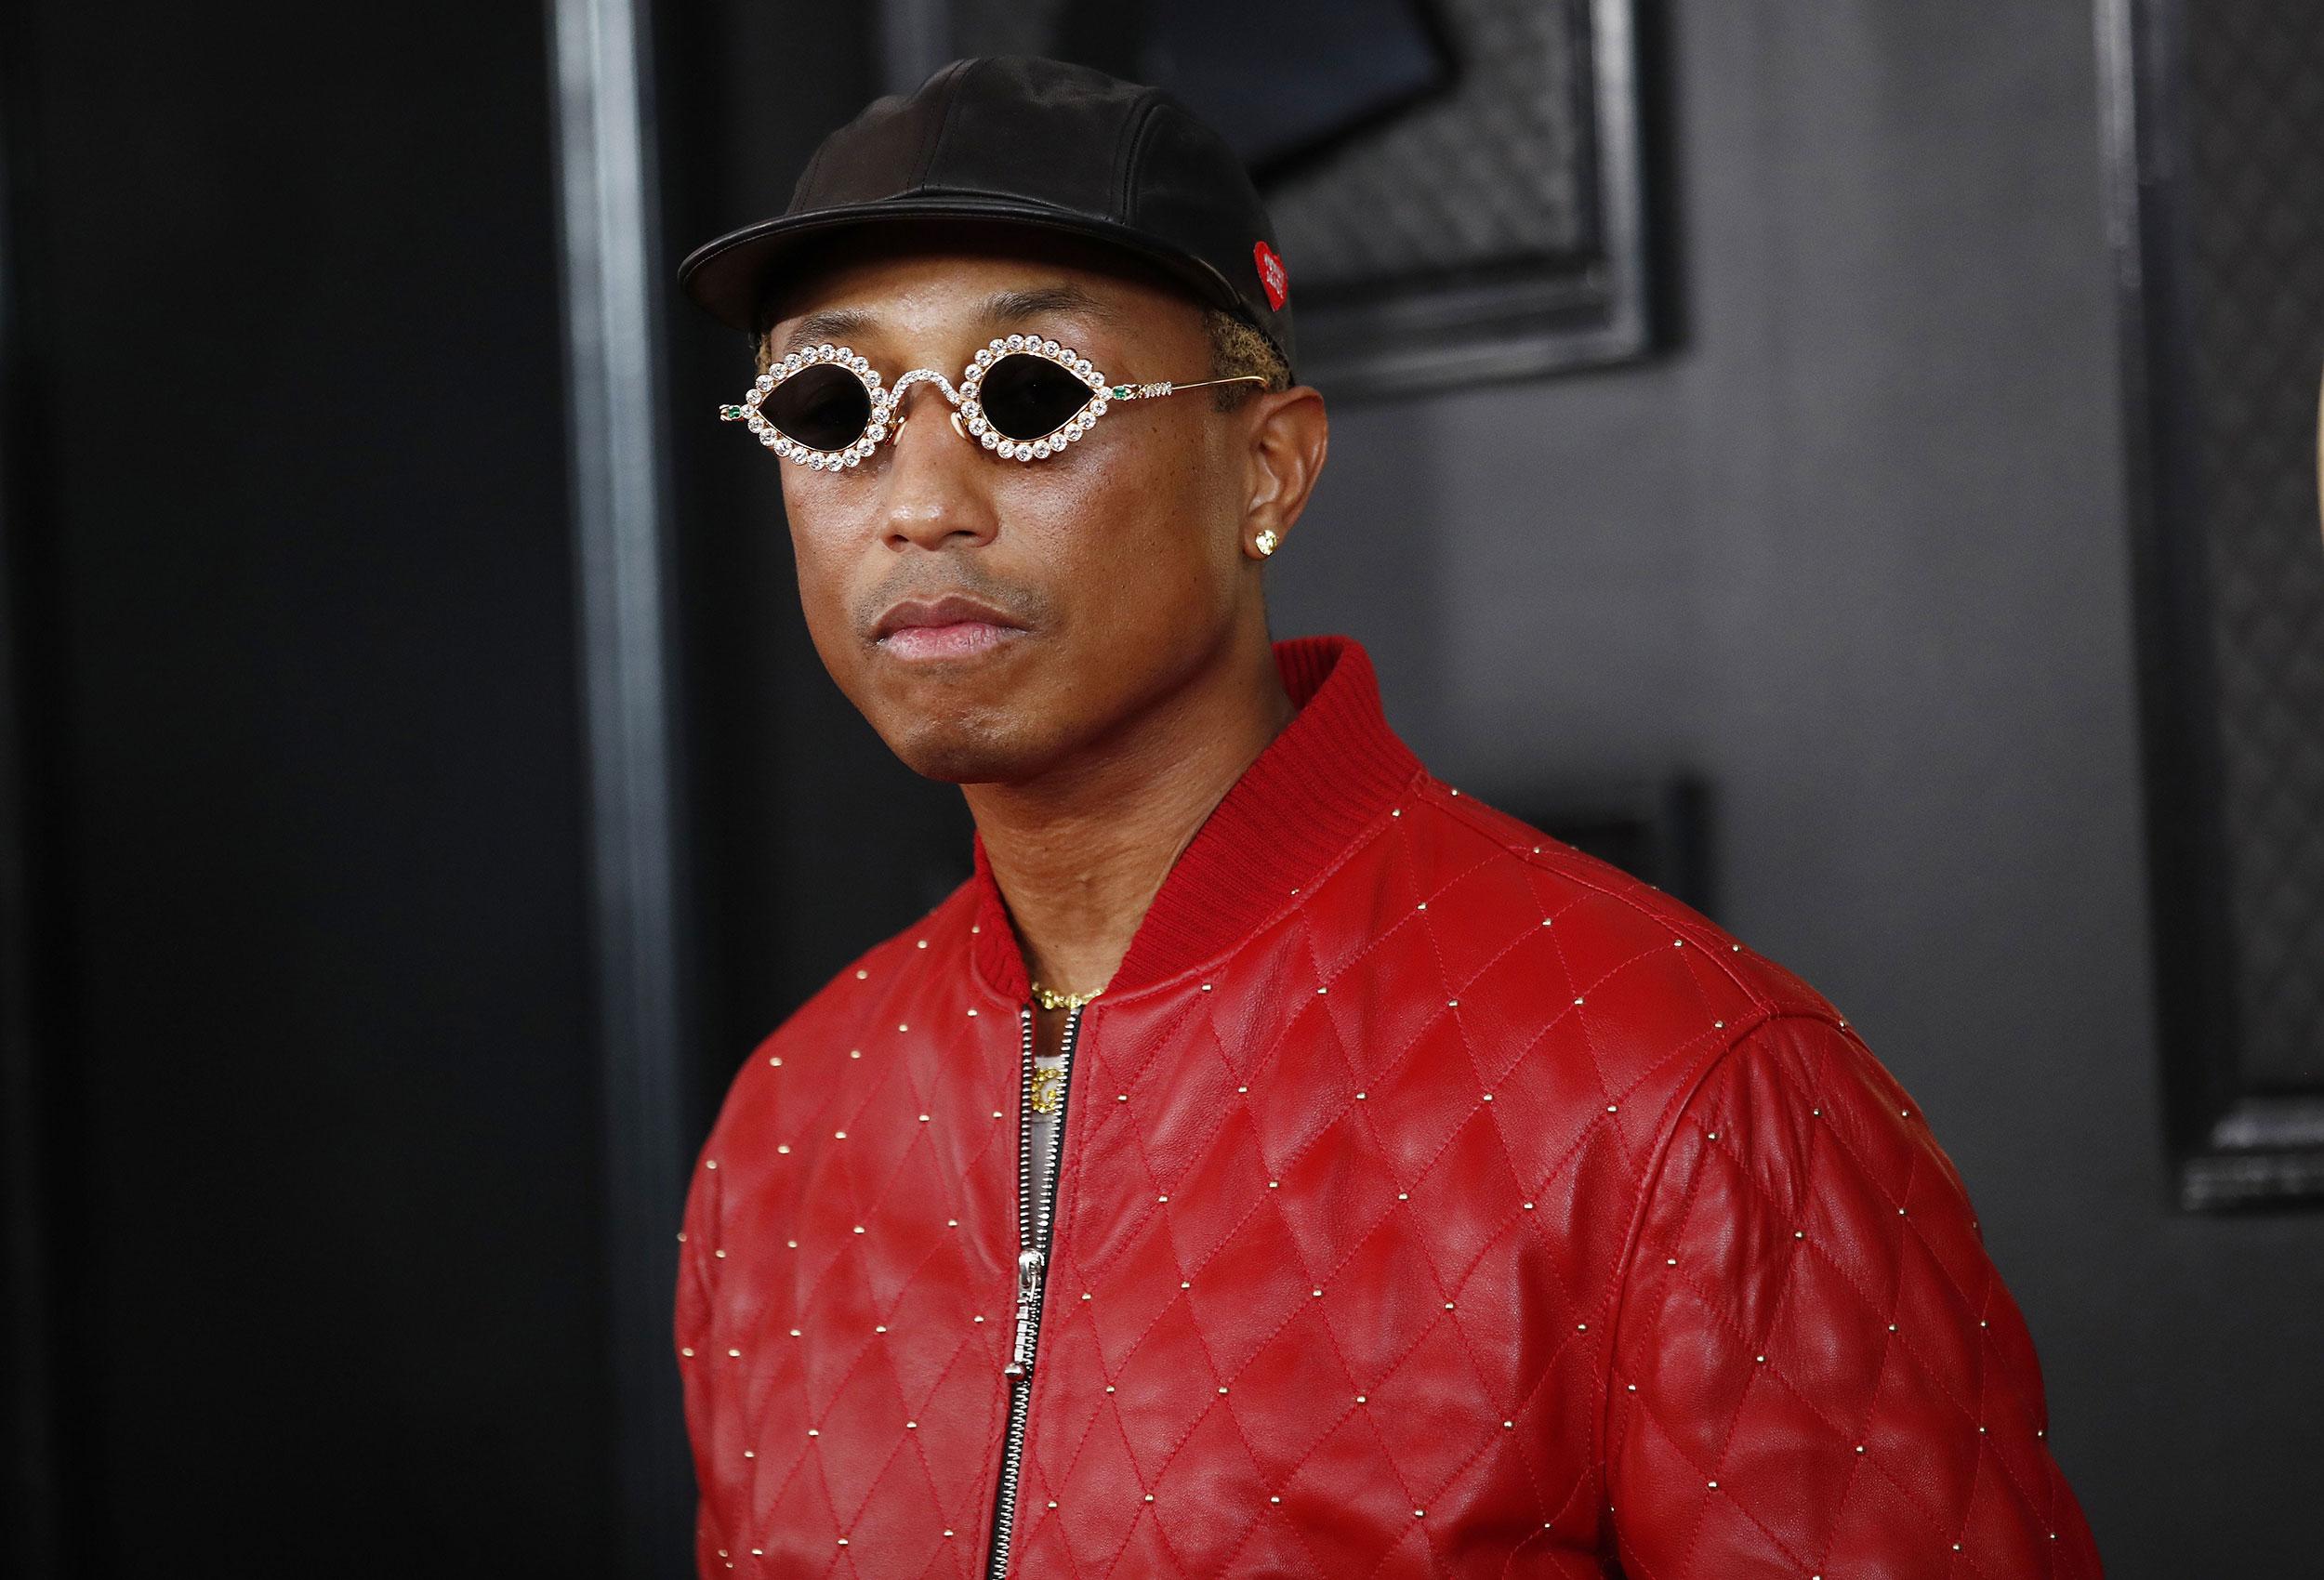 Pharrell Williams, The New Creative Director for Louis Vuitton